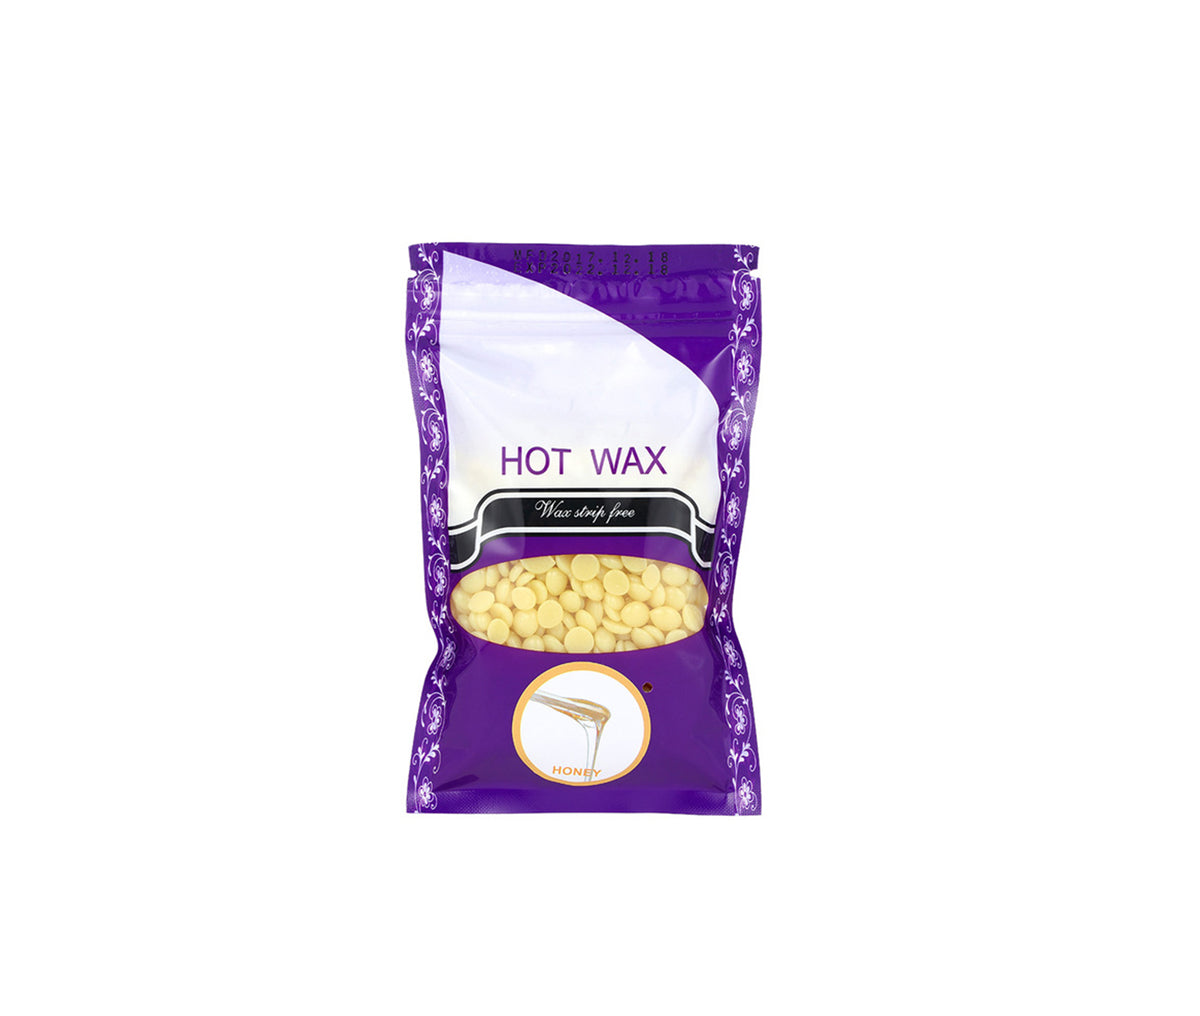 Professional Wax Heater - The Perfect Way to Get Smooth and Long-Lasting Waxing Results